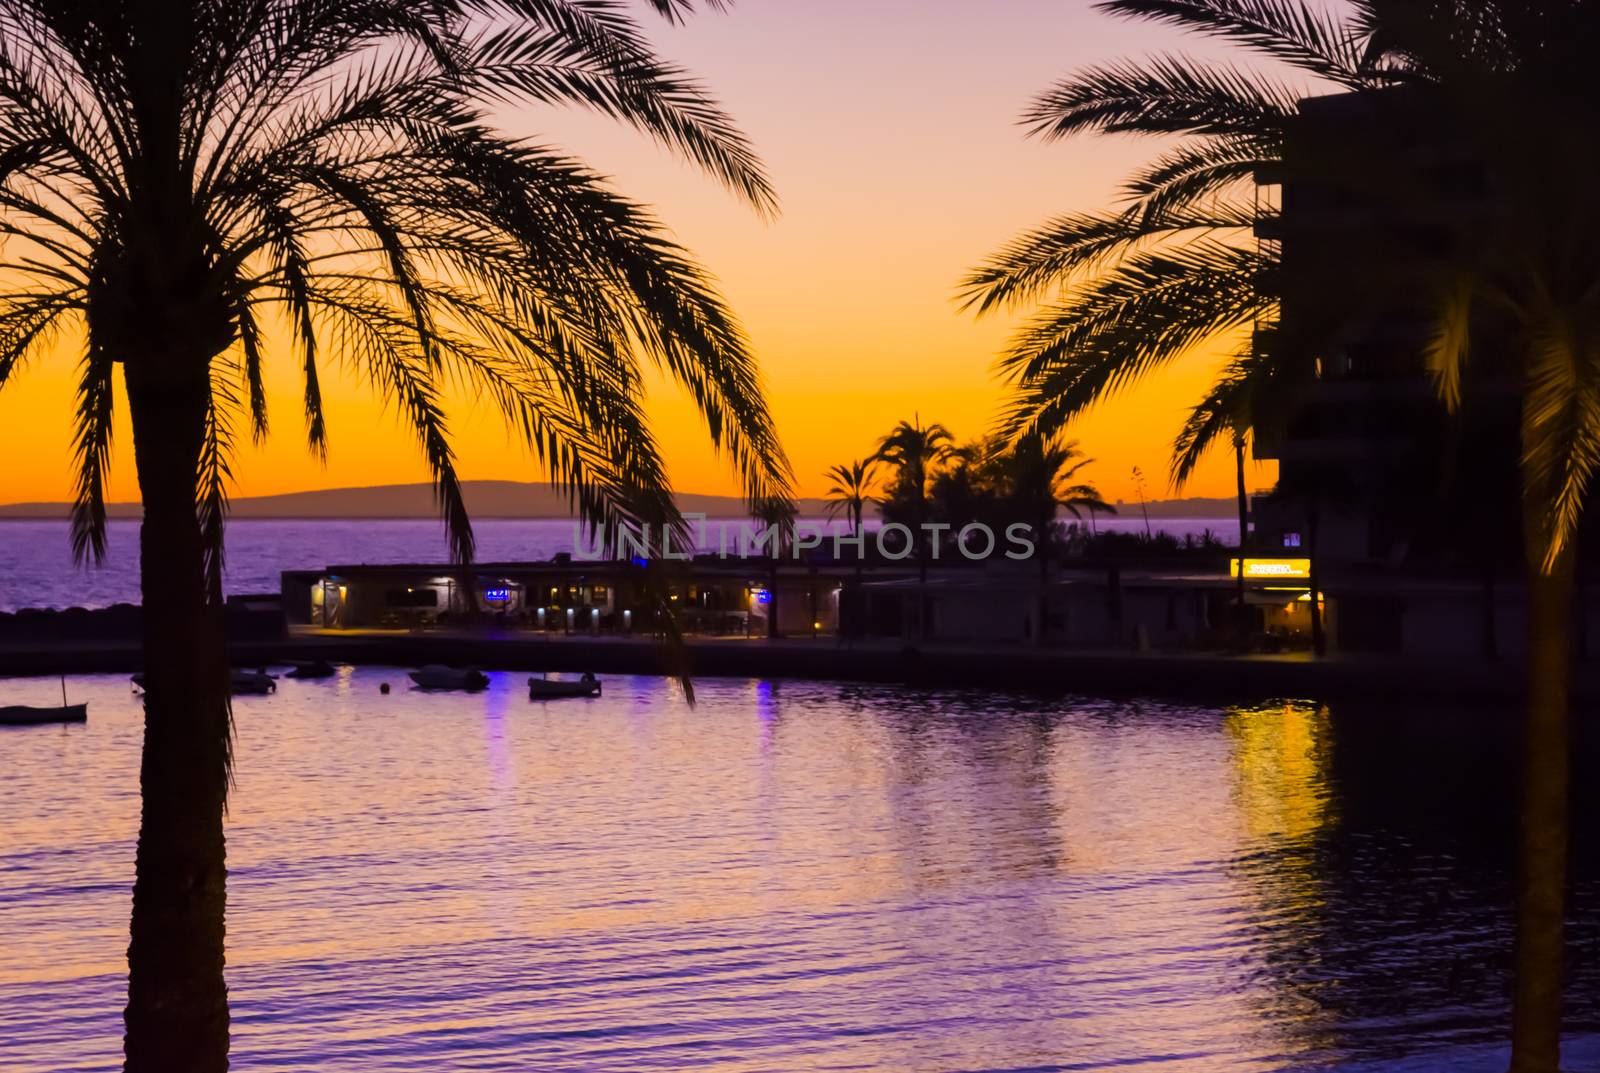 Sunset palms. Sunset in saturated yellow evening sky and purple with silhouette palm trees at Cala Estancia, Mallorca, Balearic islands, Spain.